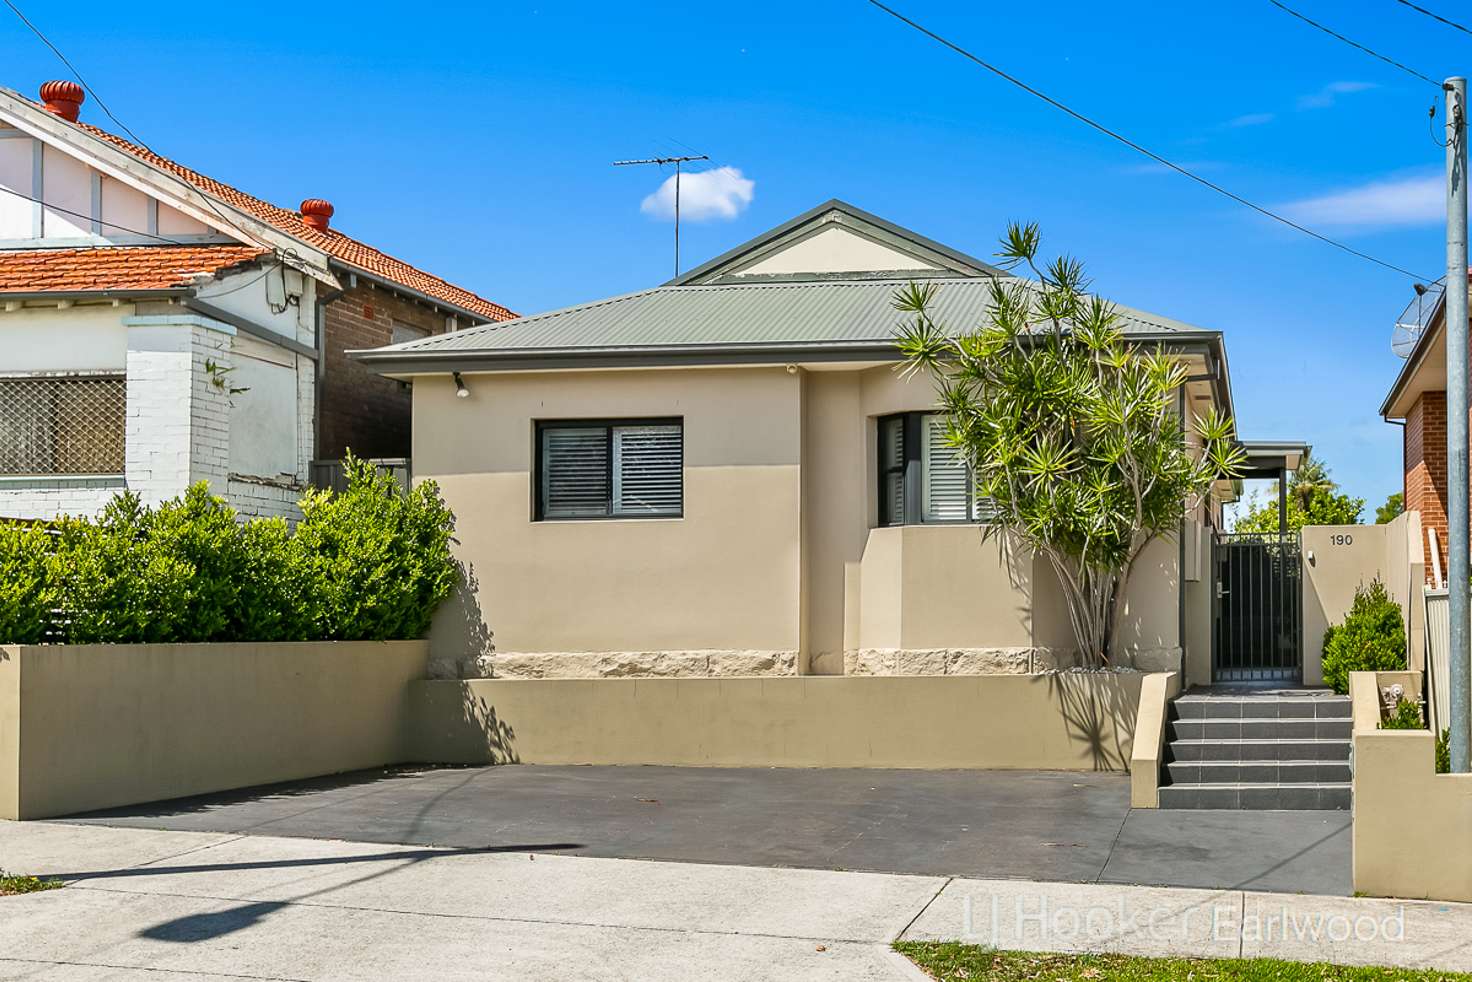 Main view of Homely house listing, 190 Bexley Road, Earlwood NSW 2206